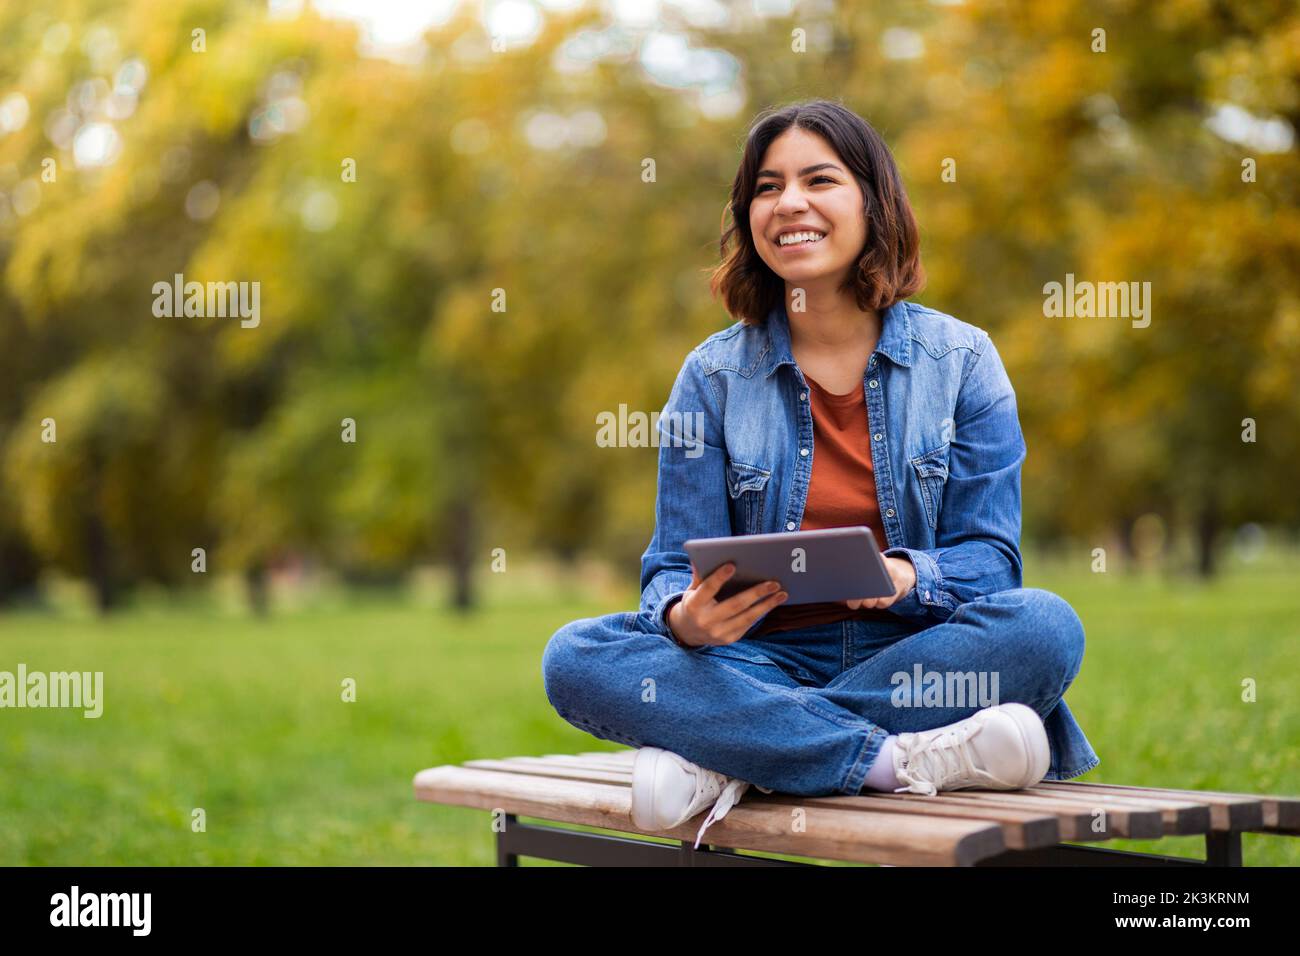 Happy Beautiful Young Arab Woman Relaxing With Digital Tablet Outdoors Stock Photo